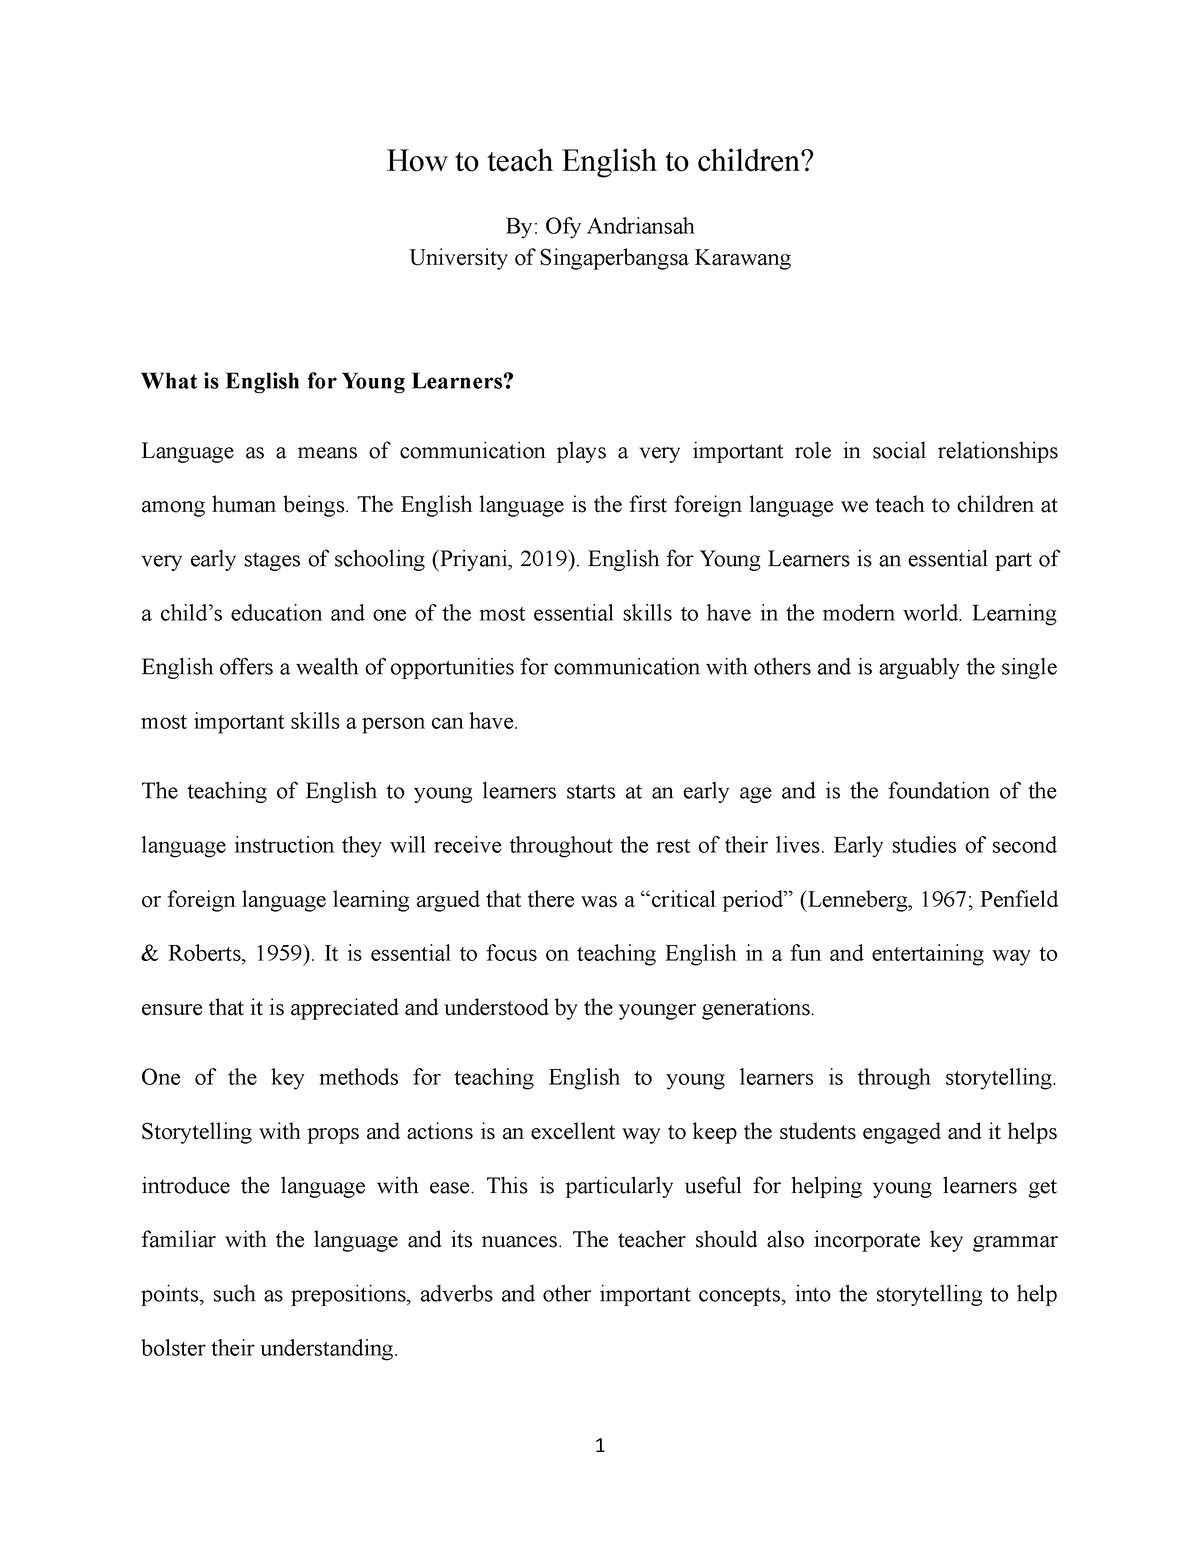 how-to-teach-english-to-children-essay-how-to-teach-english-to